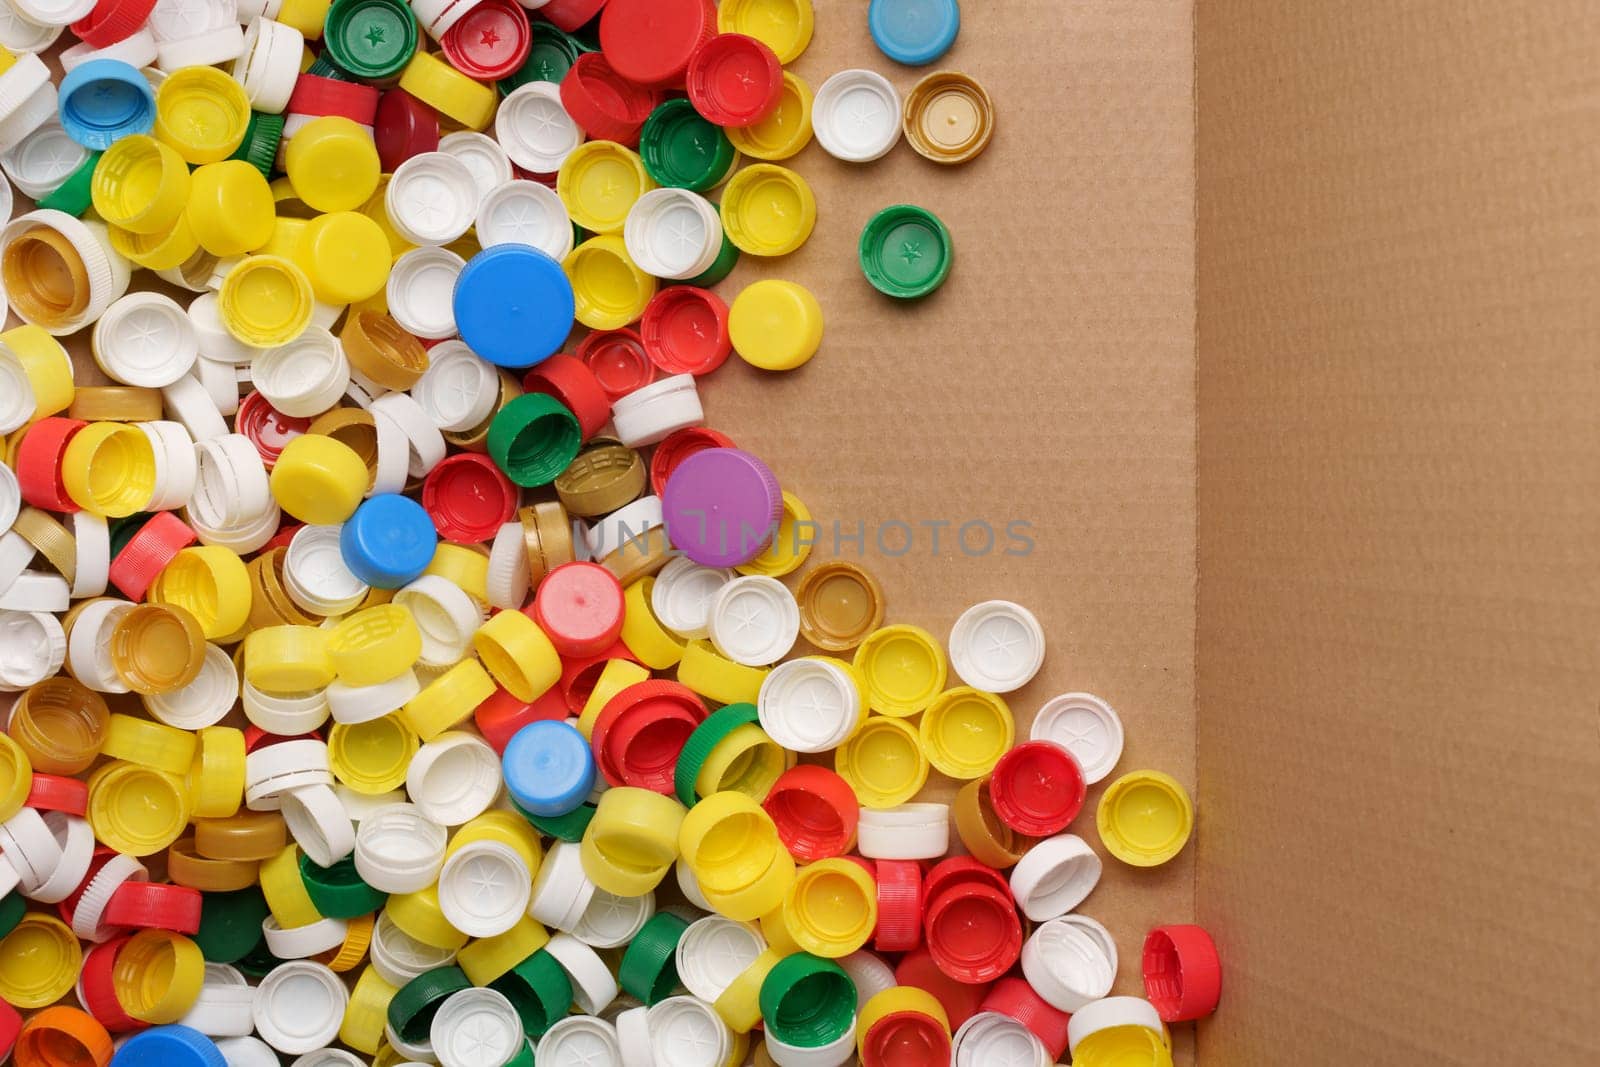 Used PET recycling plastic bottle cap plastic lids. Colorful bottle caps background cardboard box. Garbage PET waste recycling bottle cap sorting waste plastic garbage collection. Recyclable materials by synel